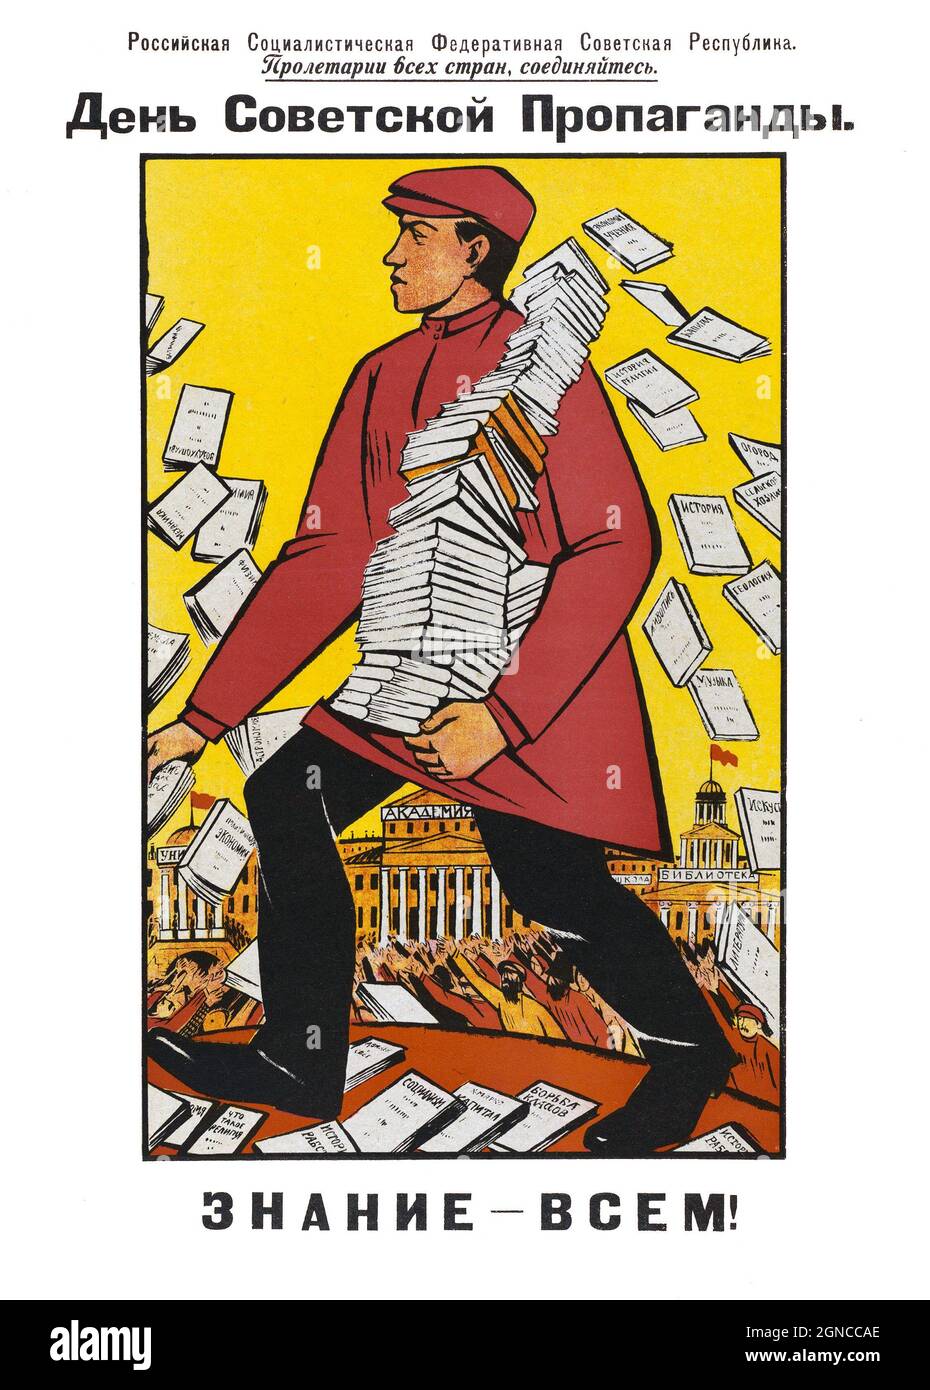 Poster for the Day of Soviet Propaganda день советский пропаганда / знание всем! A man with a pile of books under his arm scatters books around. Behind him the books are received by a crowd with outstretched hands. In the background a row of buildings including a university, an academy and a library. The books cover a variety of topics, including history, class struggle, and agriculture. Under the slogan: 'knowledge for everyone!'  Optimised and enhanced version of an historical Soviet illustration. Stock Photo